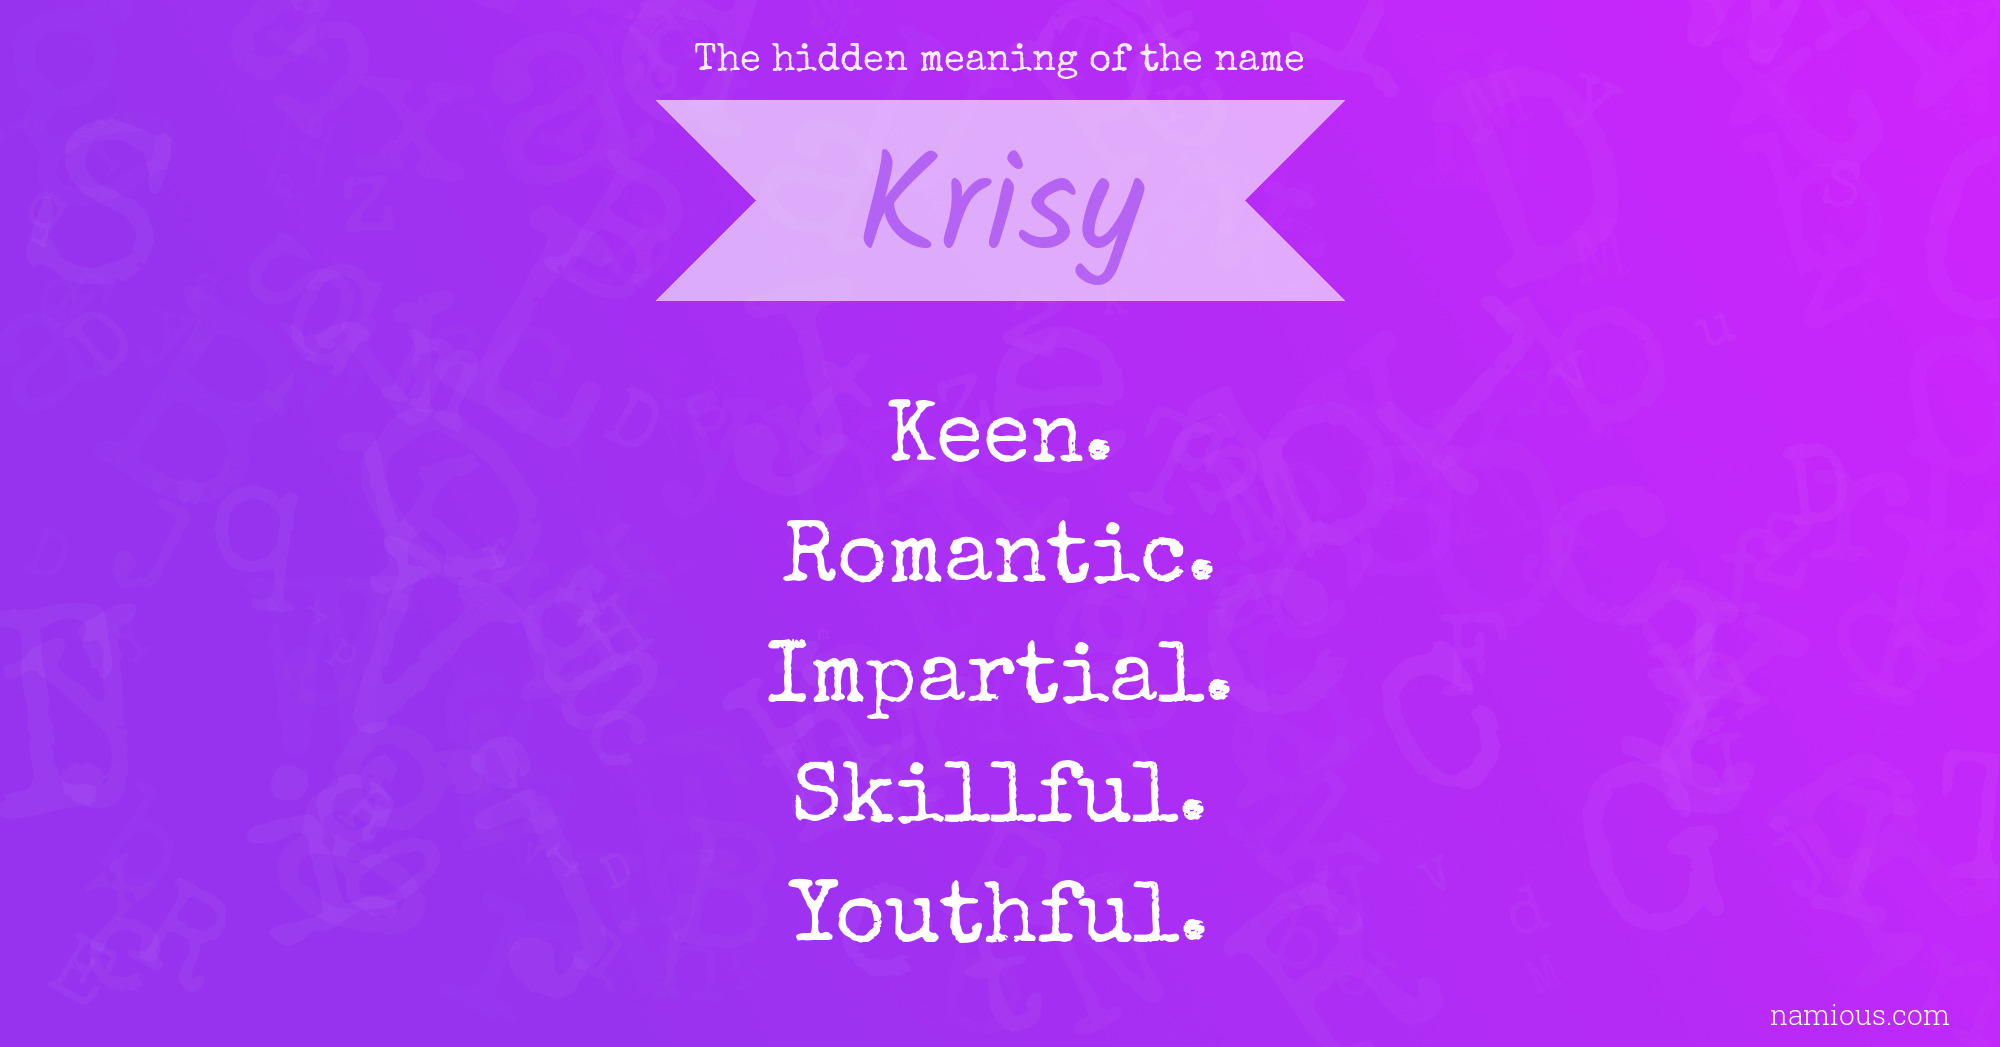 The hidden meaning of the name Krisy